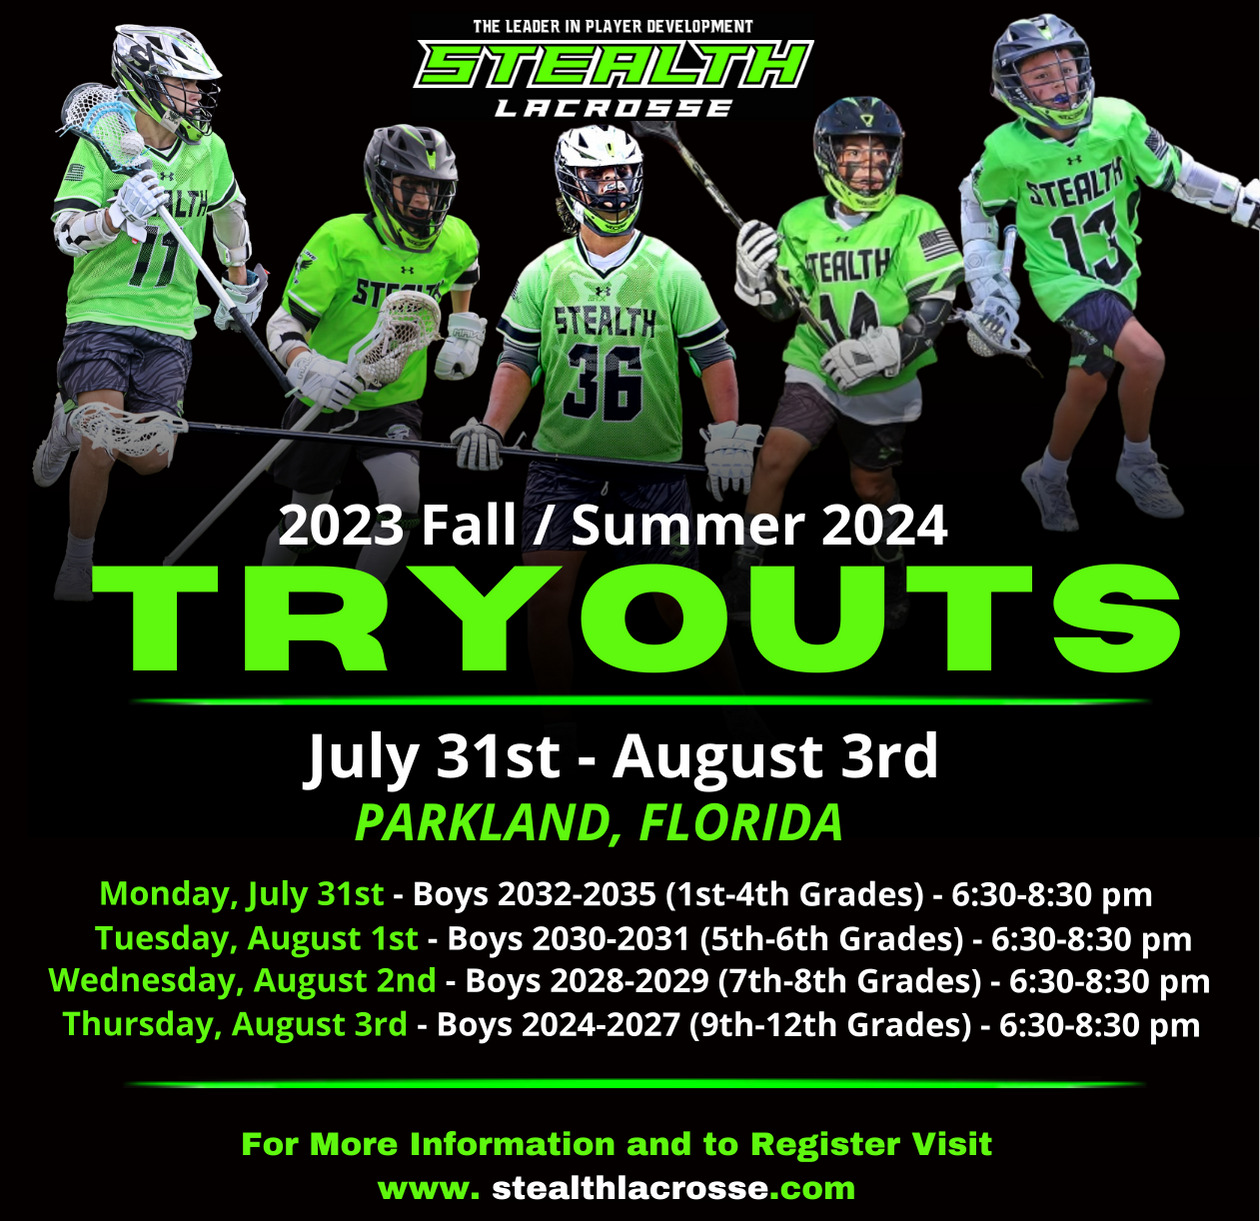 2023 Fall 2024 Summer Tryout